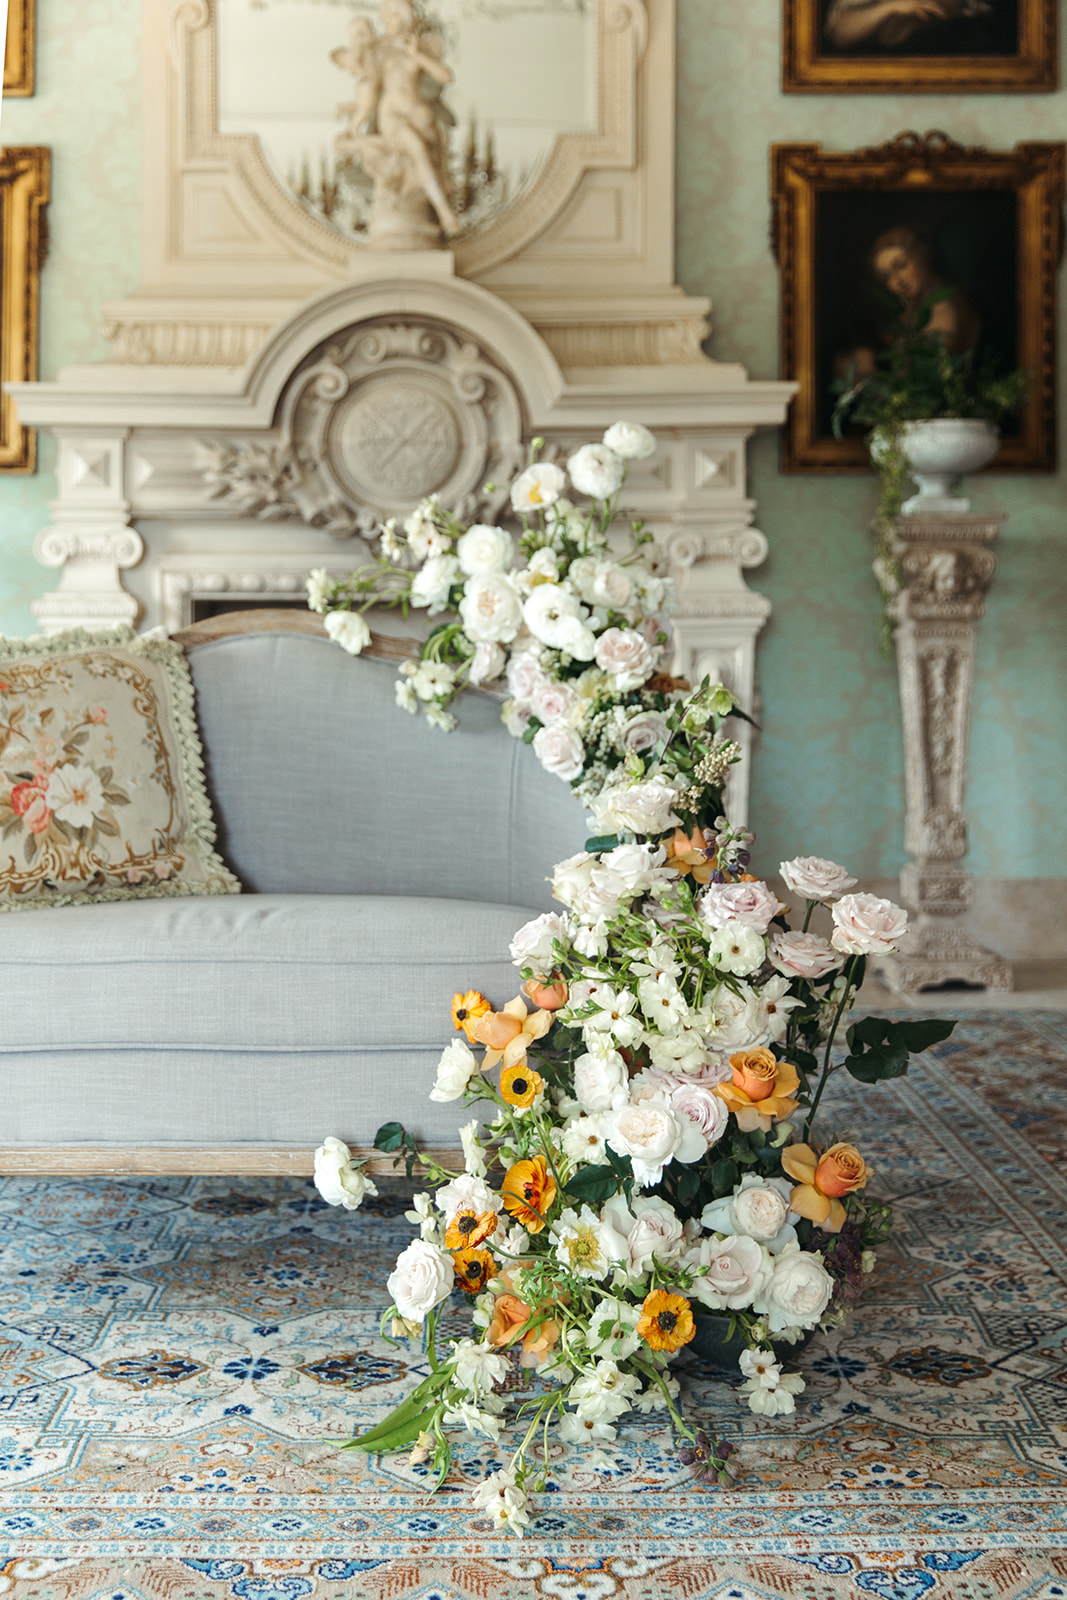 19 Luxury Wedding Ideas for an Elegant Celebration. Floral sculpture on the couch.